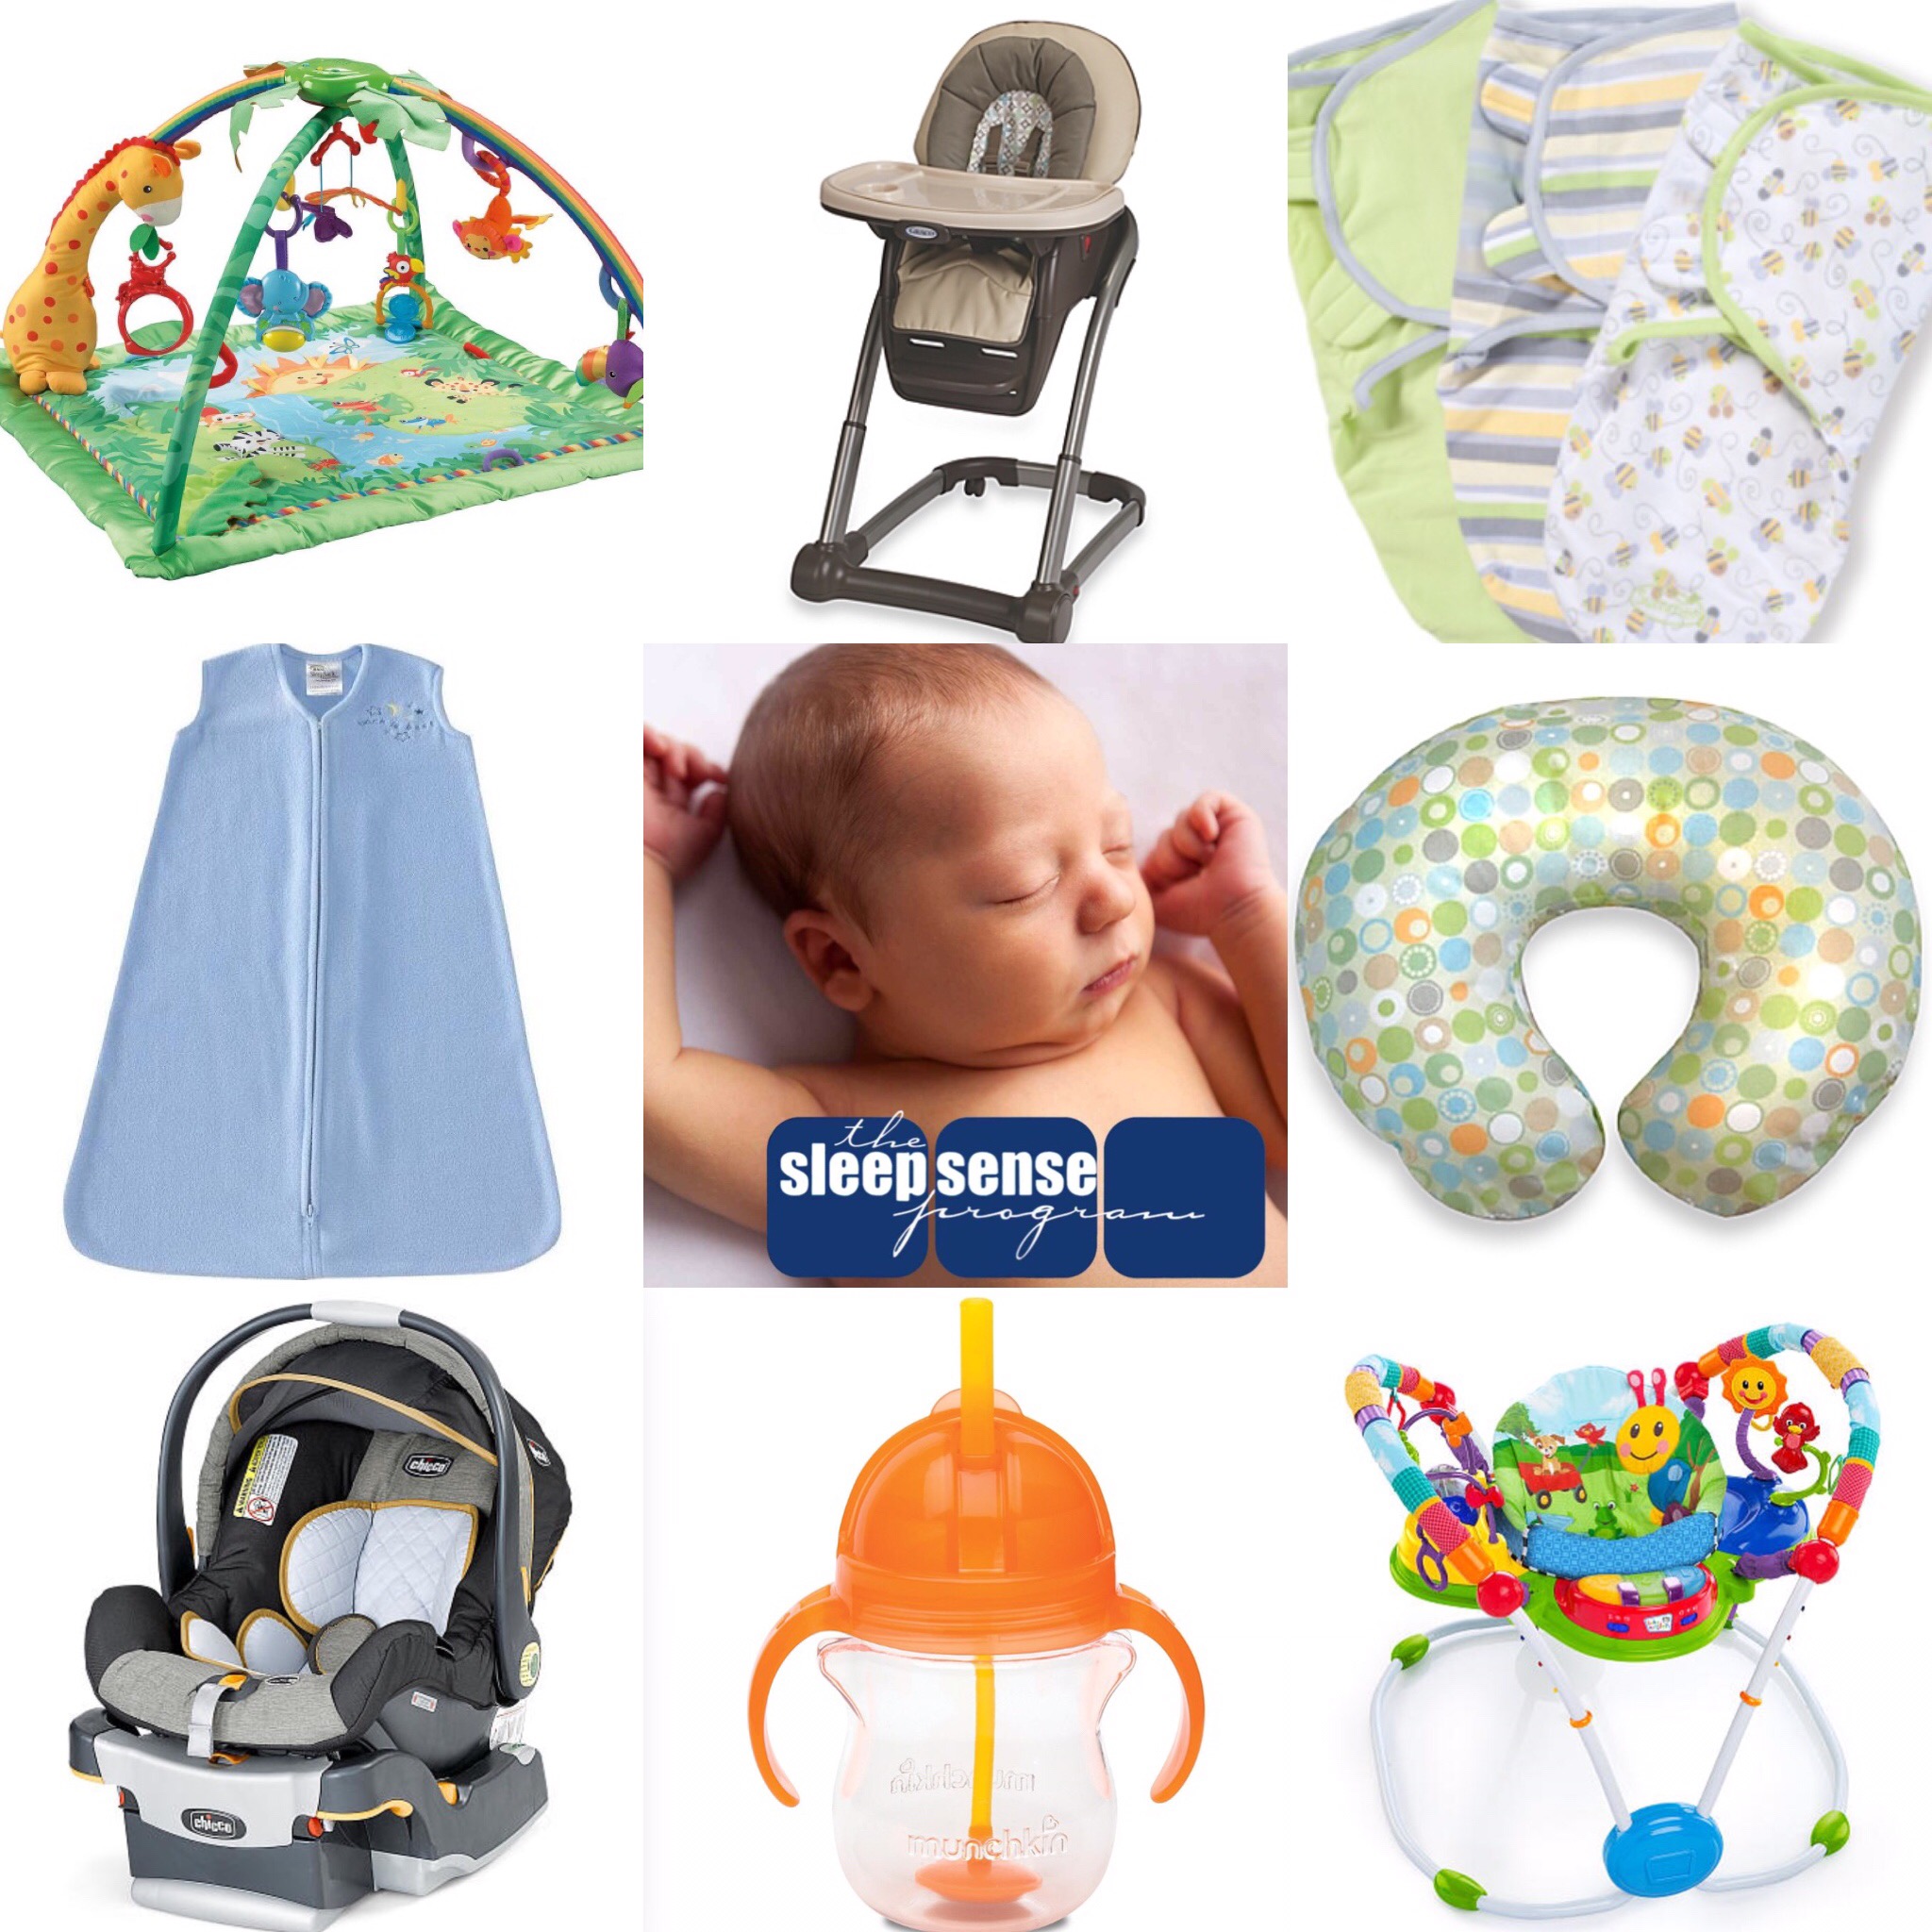 My 10 "Must Have" Baby Products List